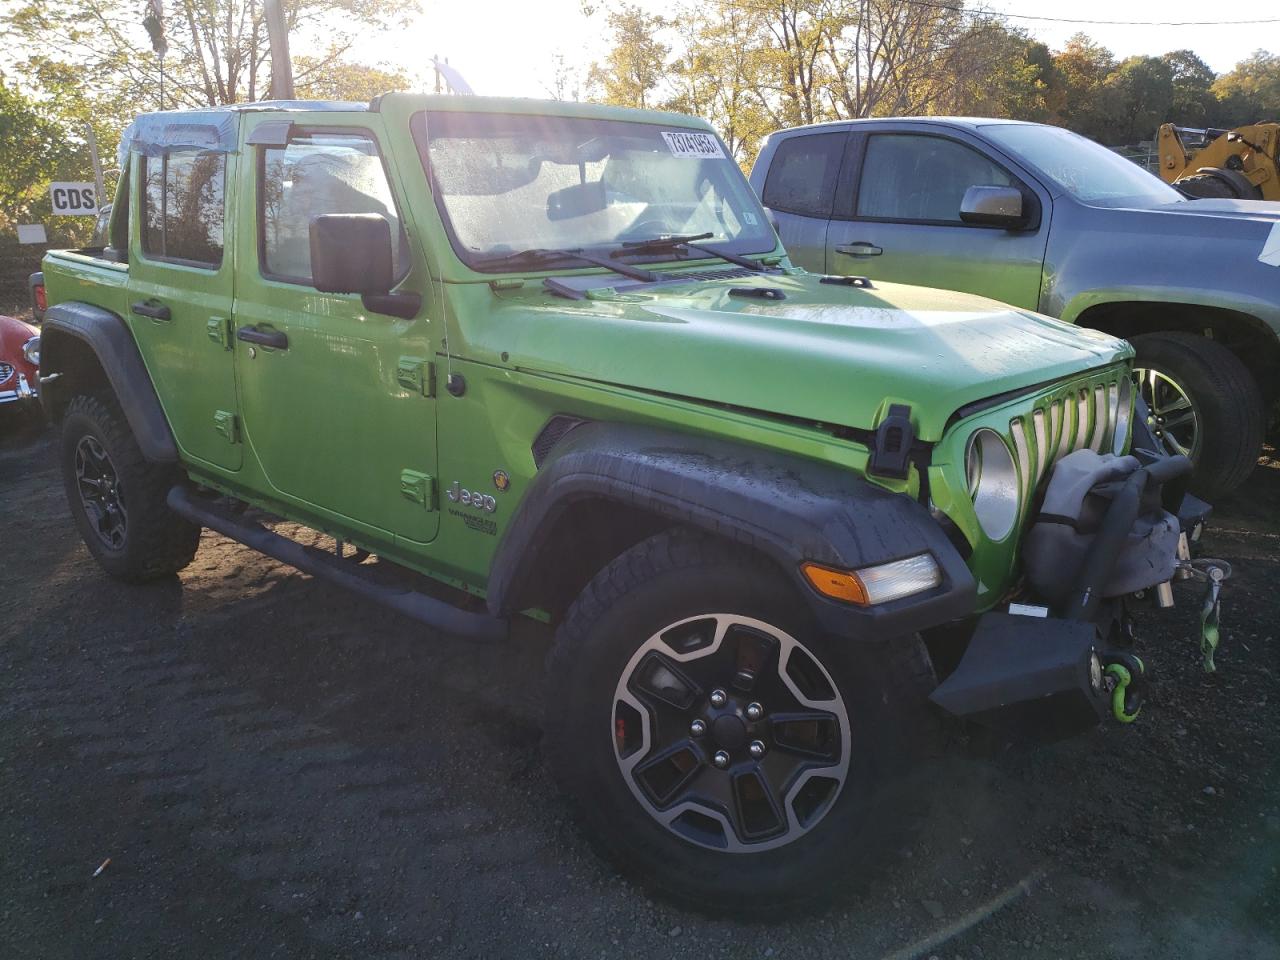 2018 jeep wrangler Unlimited Sport in Green- Front Three-Quarter View